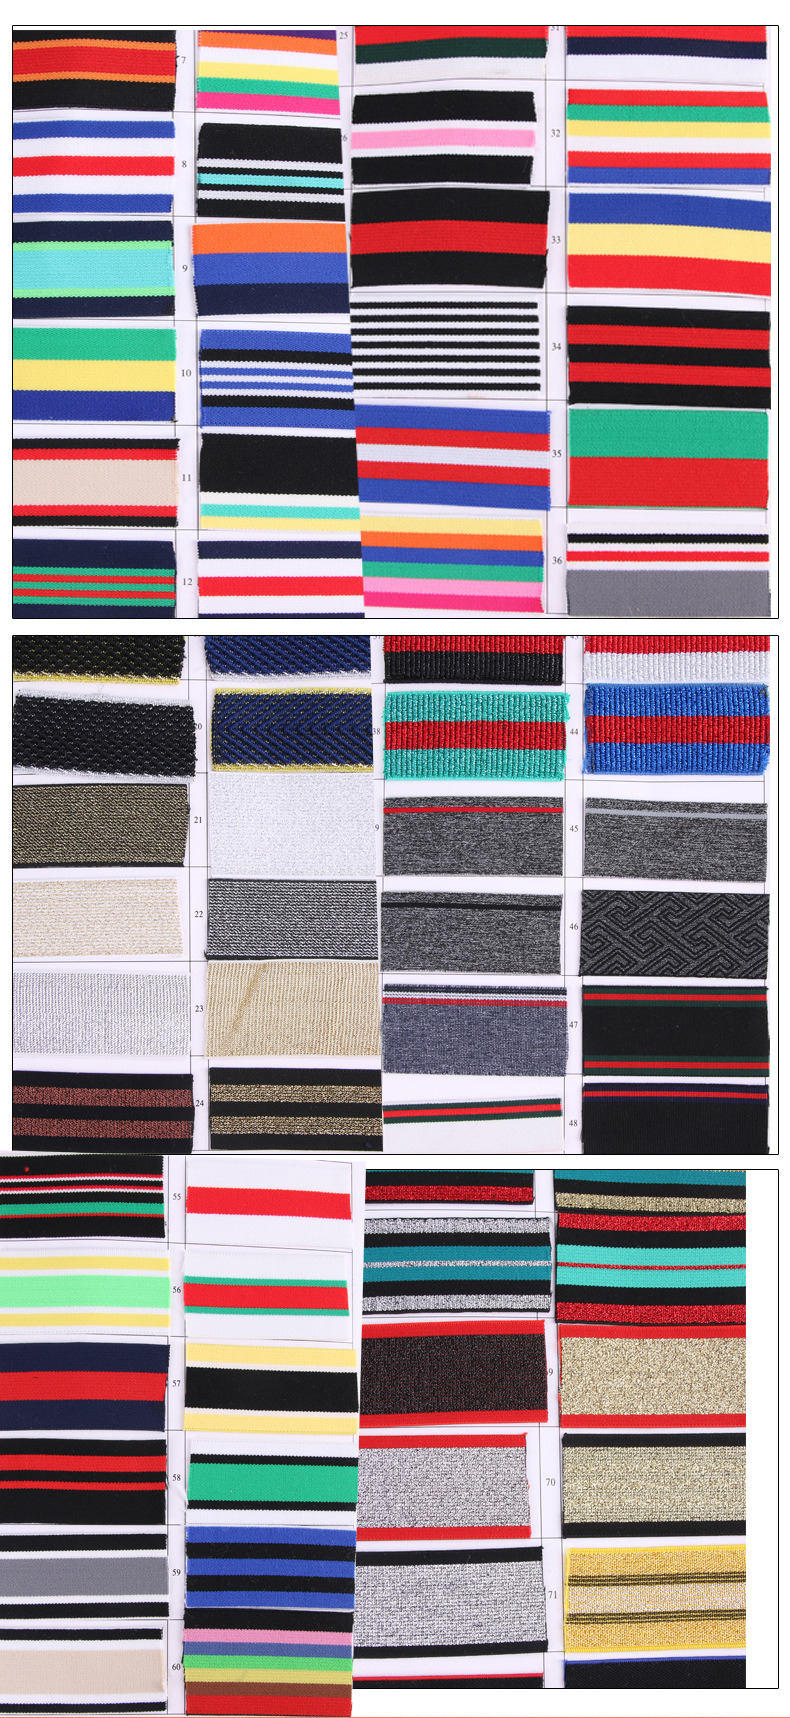 Wholesales Round Knitted Shoes Elastic Band